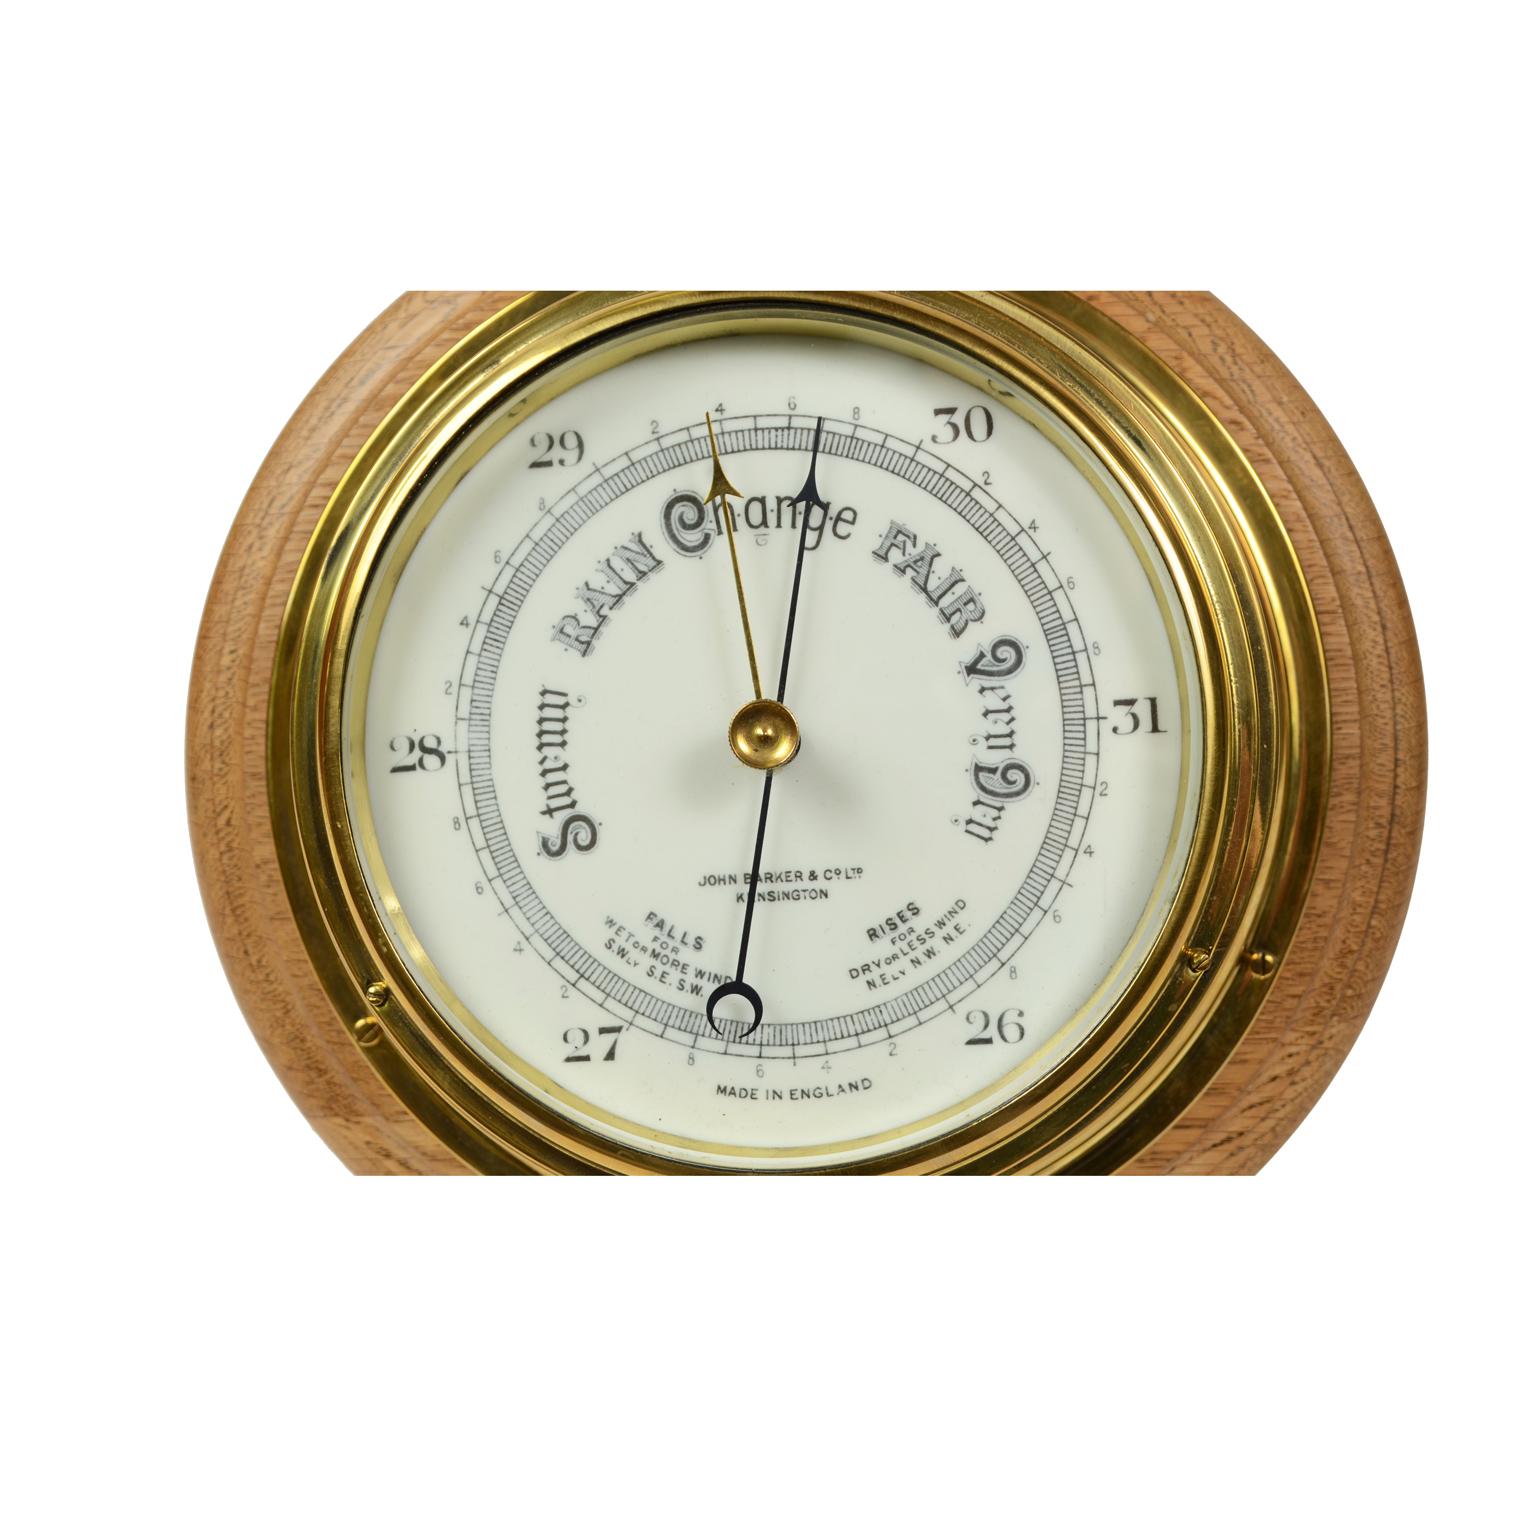 Aneroid barometer made of brass-mounted on a turned wooden plank, with scale of white opaline, signed John Barker & Co Ltd Kensington, made in the early 1900. Very good condition and working perfectly. Diameter plank included 28 cm, height 10